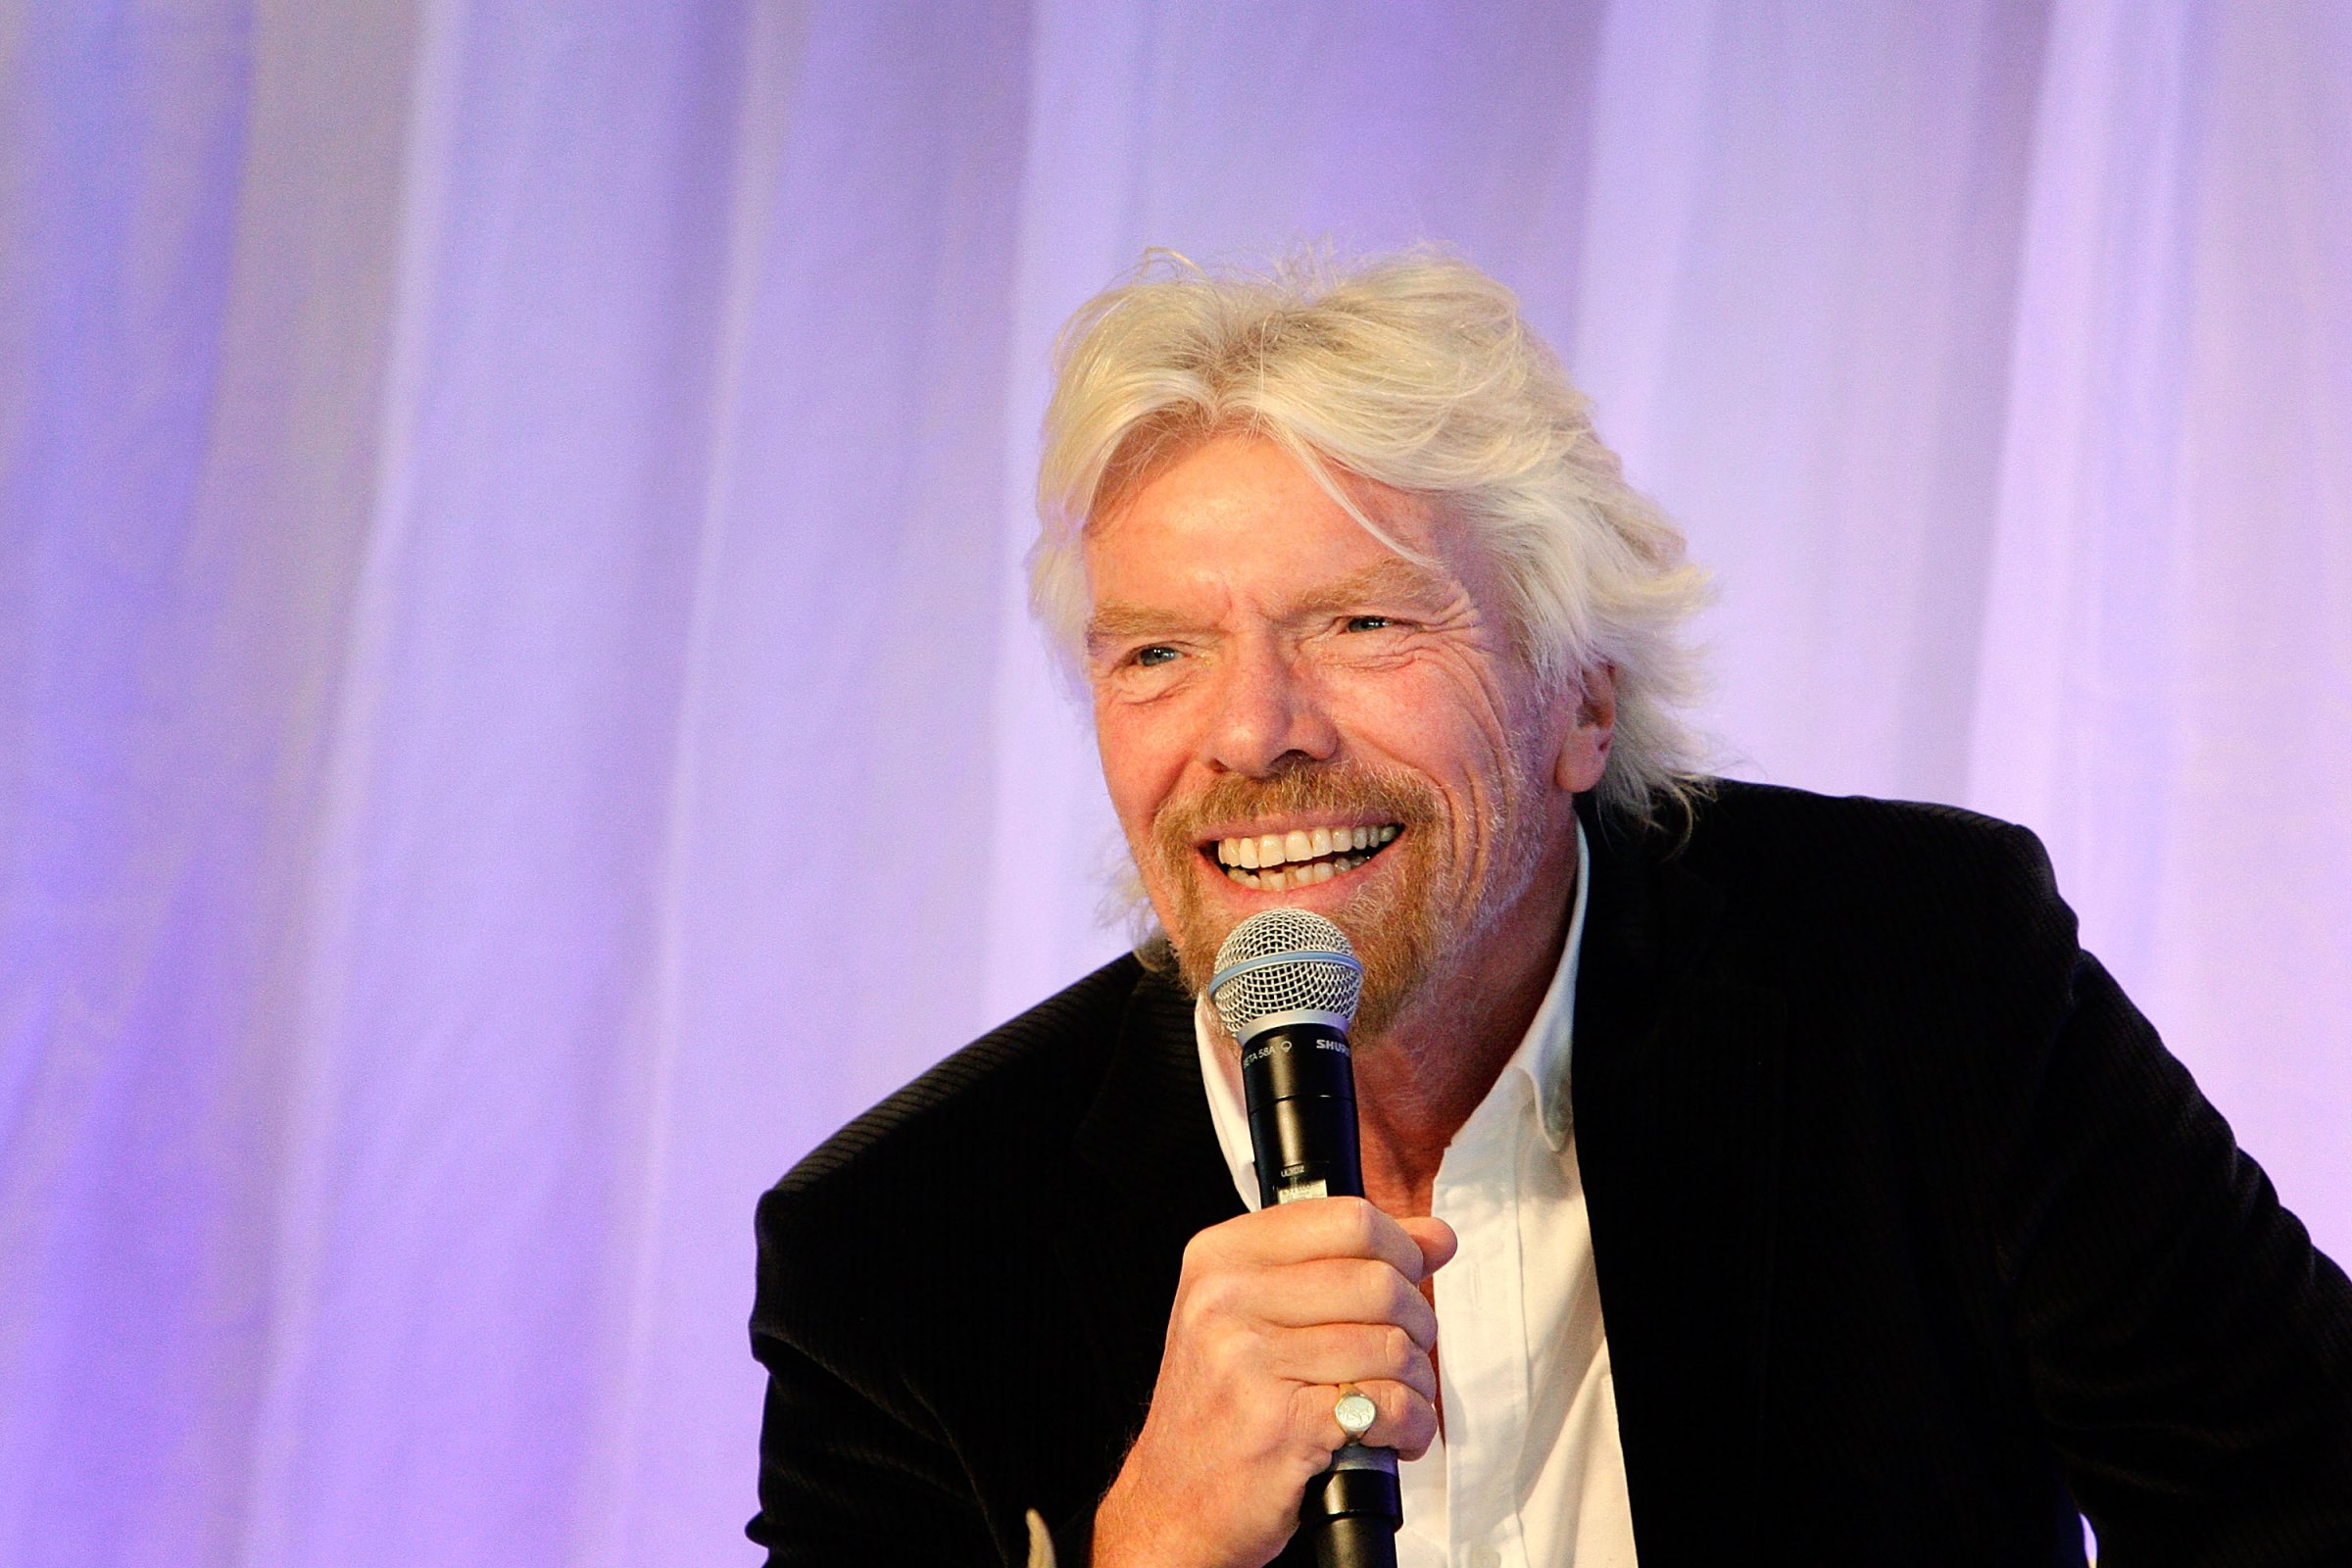 Richard Branson at the Talent Unleashed Awards 2015 in Sydney on Sept. 11, 2015.